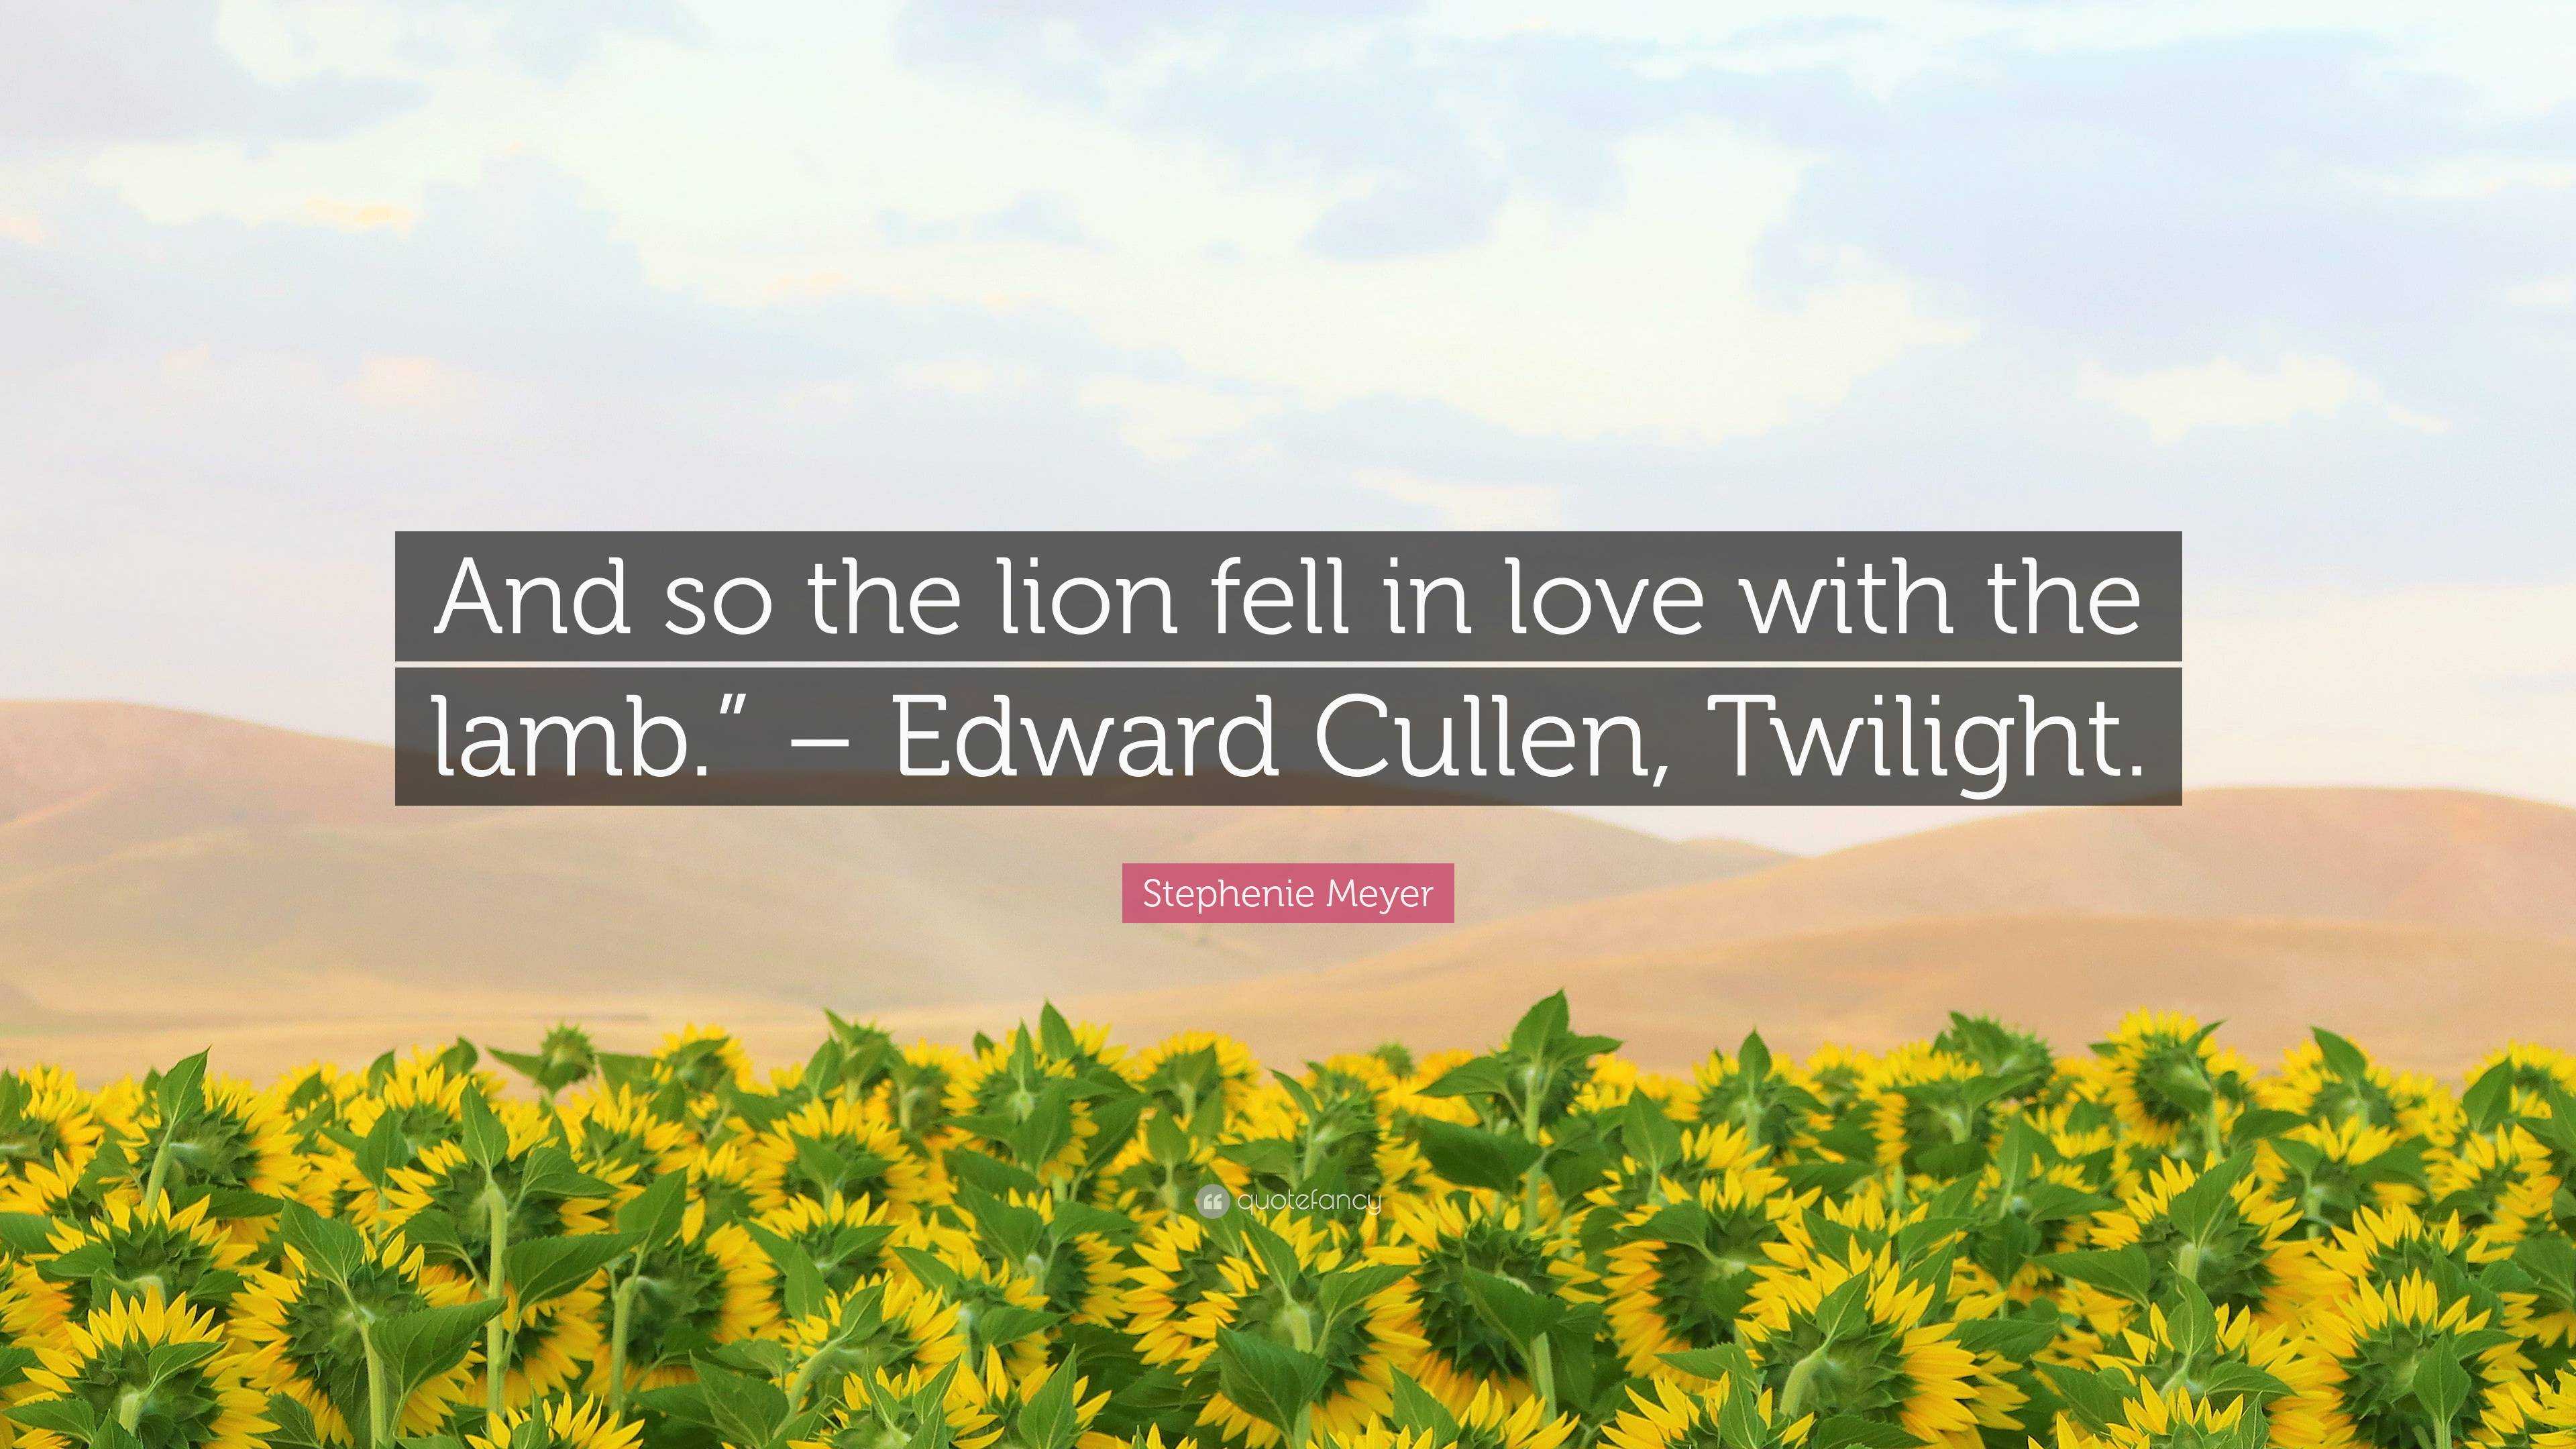 Stephenie Meyer Quote And So The Lion Fell In Love With The Lamb Edward Cullen Twilight